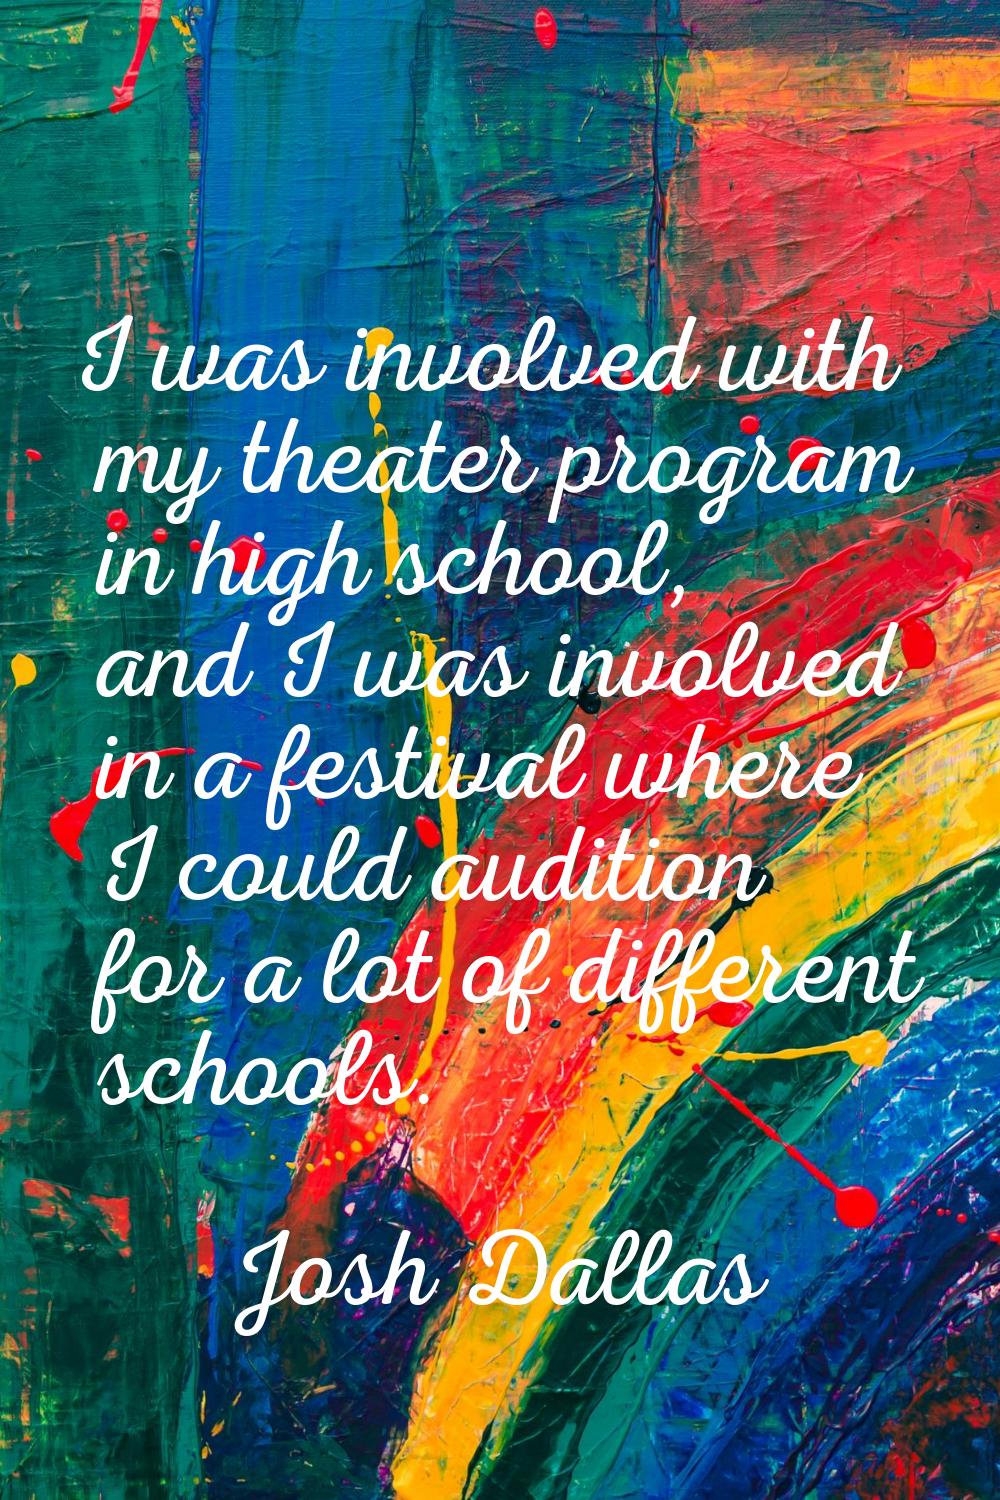 I was involved with my theater program in high school, and I was involved in a festival where I cou